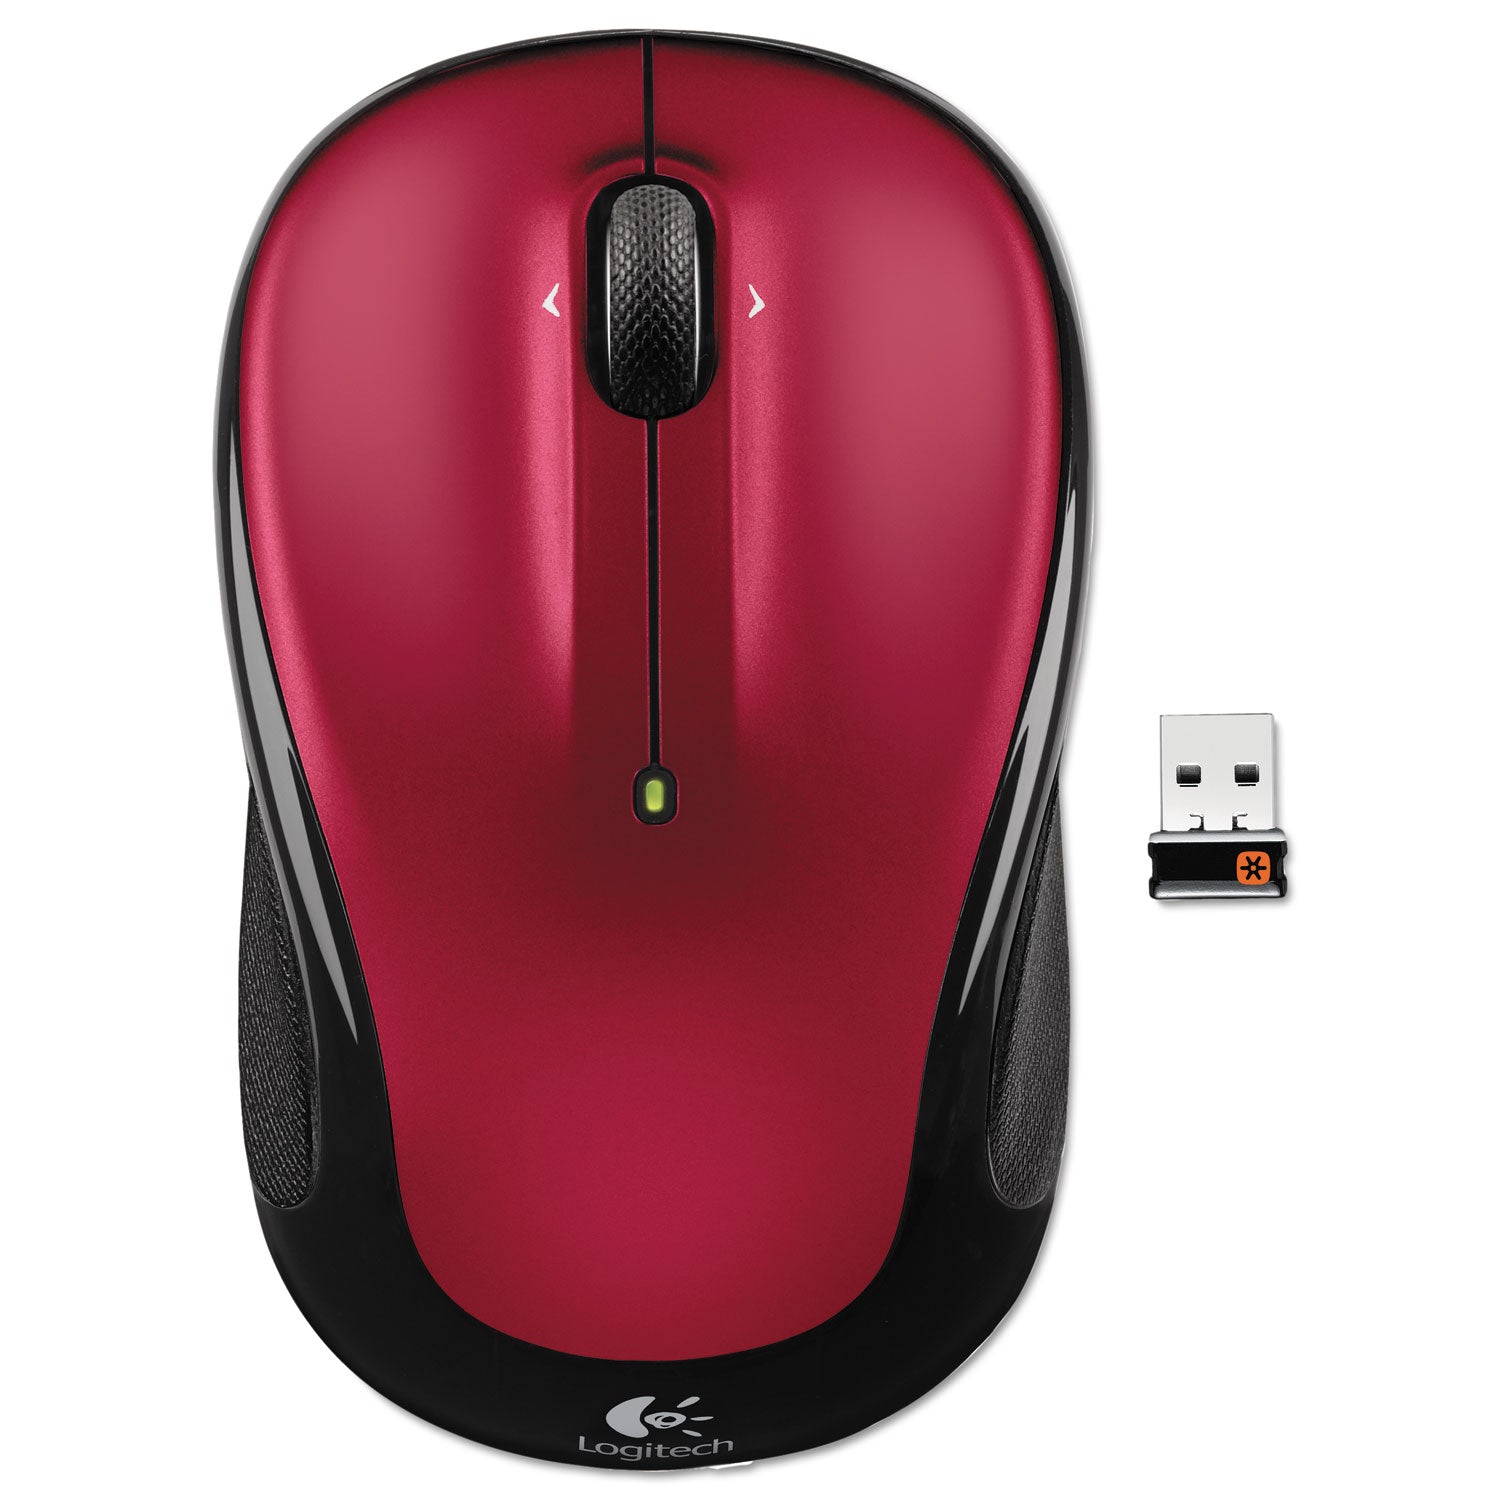 M325 Wireless Mouse, 2.4 GHz Frequency/30 ft Wireless Range, Left/Right Hand Use, Red - 